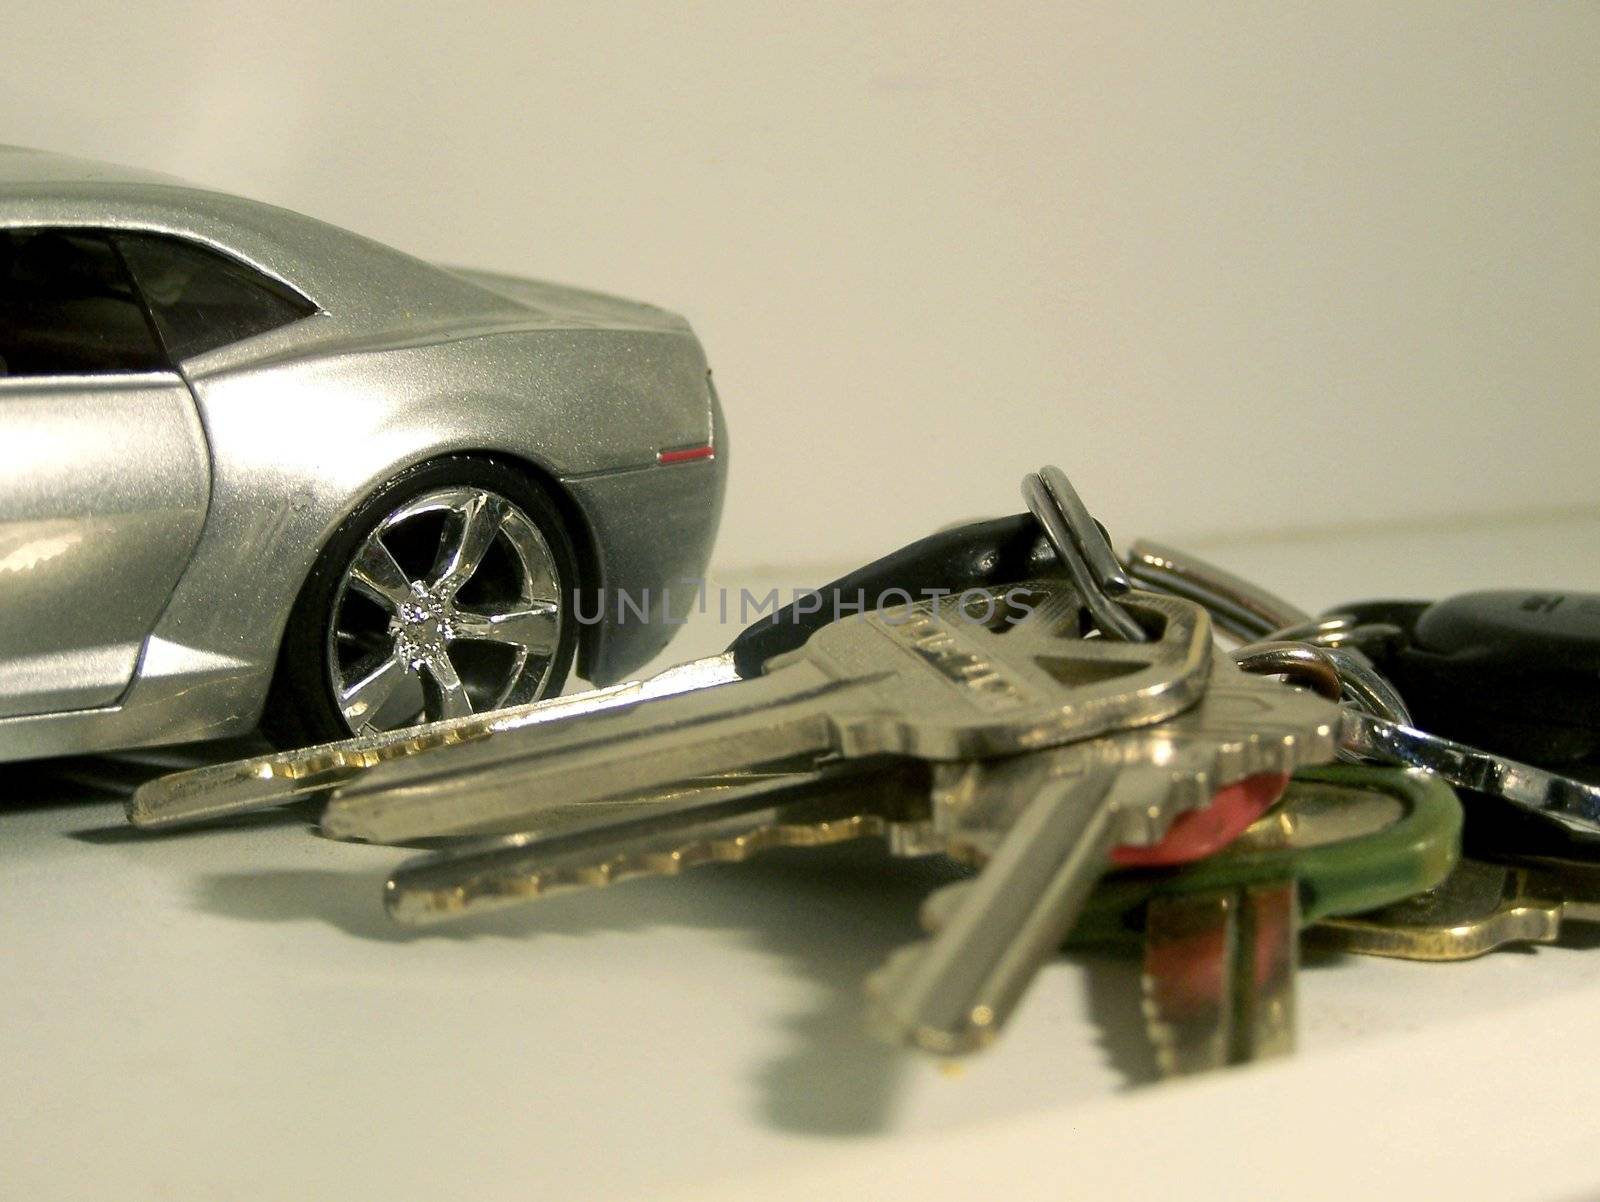 Shiny silver car with car keys in the foreground. Auto loan, auto financing, auto sale for buyer.